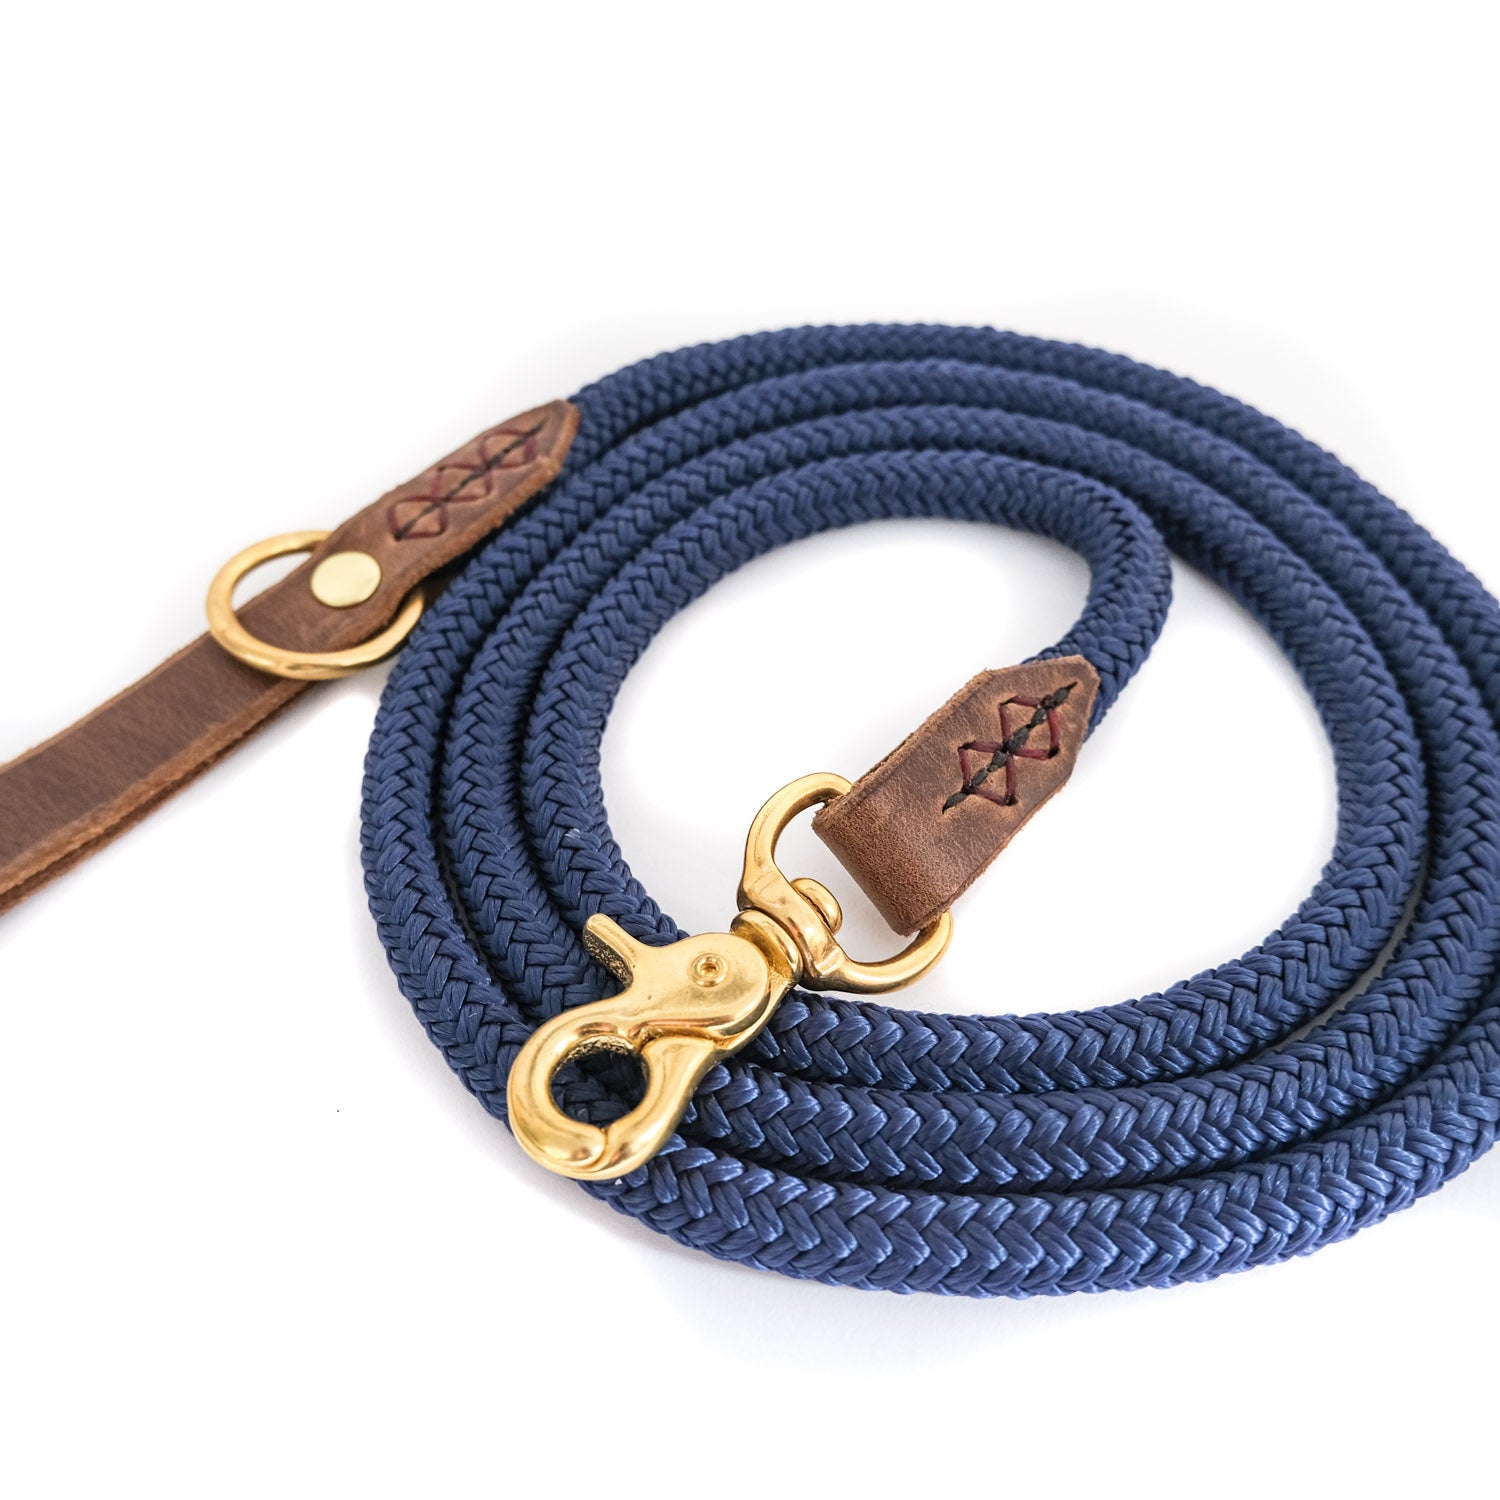 Dog Leash with Leather Handle Cotton Rope, Best Dog Leashes